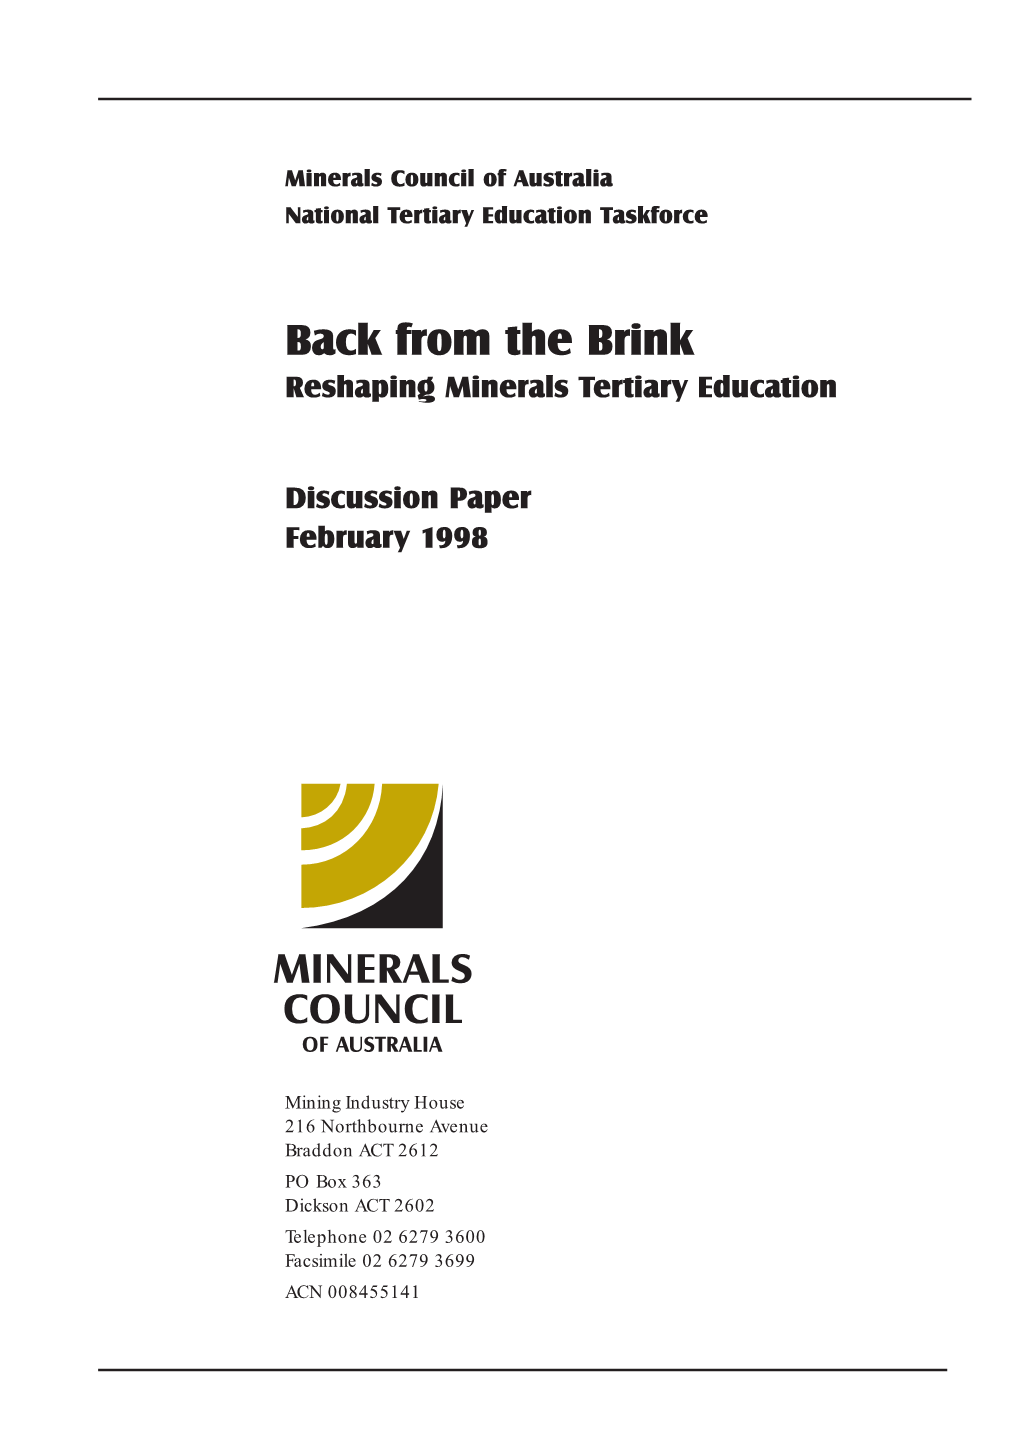 Back from the Brink Reshaping Minerals Tertiary Education